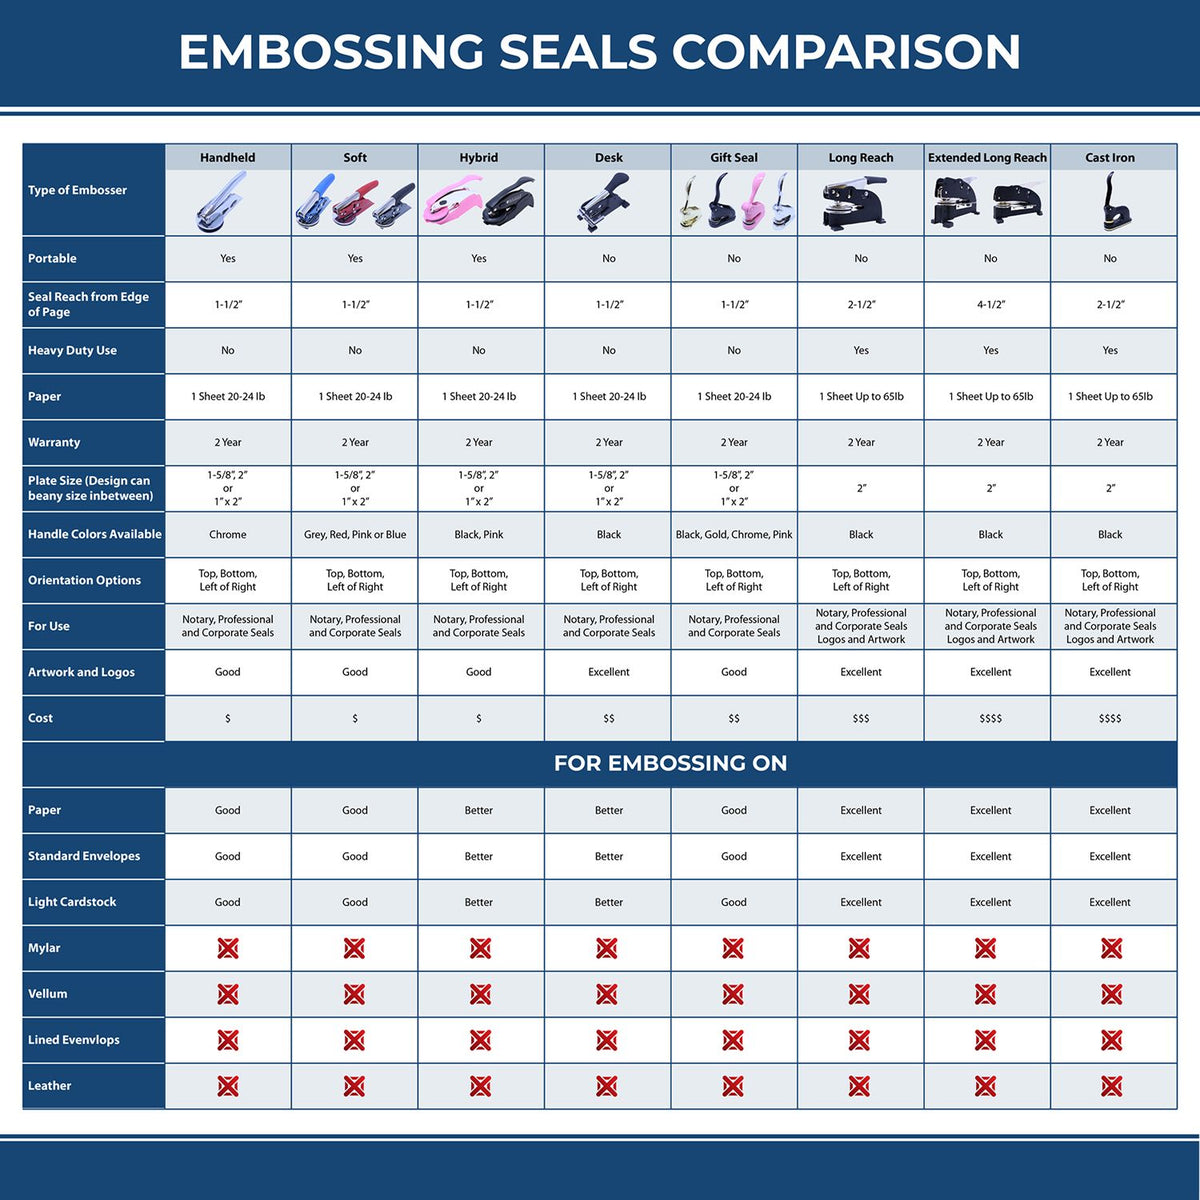 A comparison chart for the different types of mount models available for the Long Reach Hawaii Land Surveyor Seal.